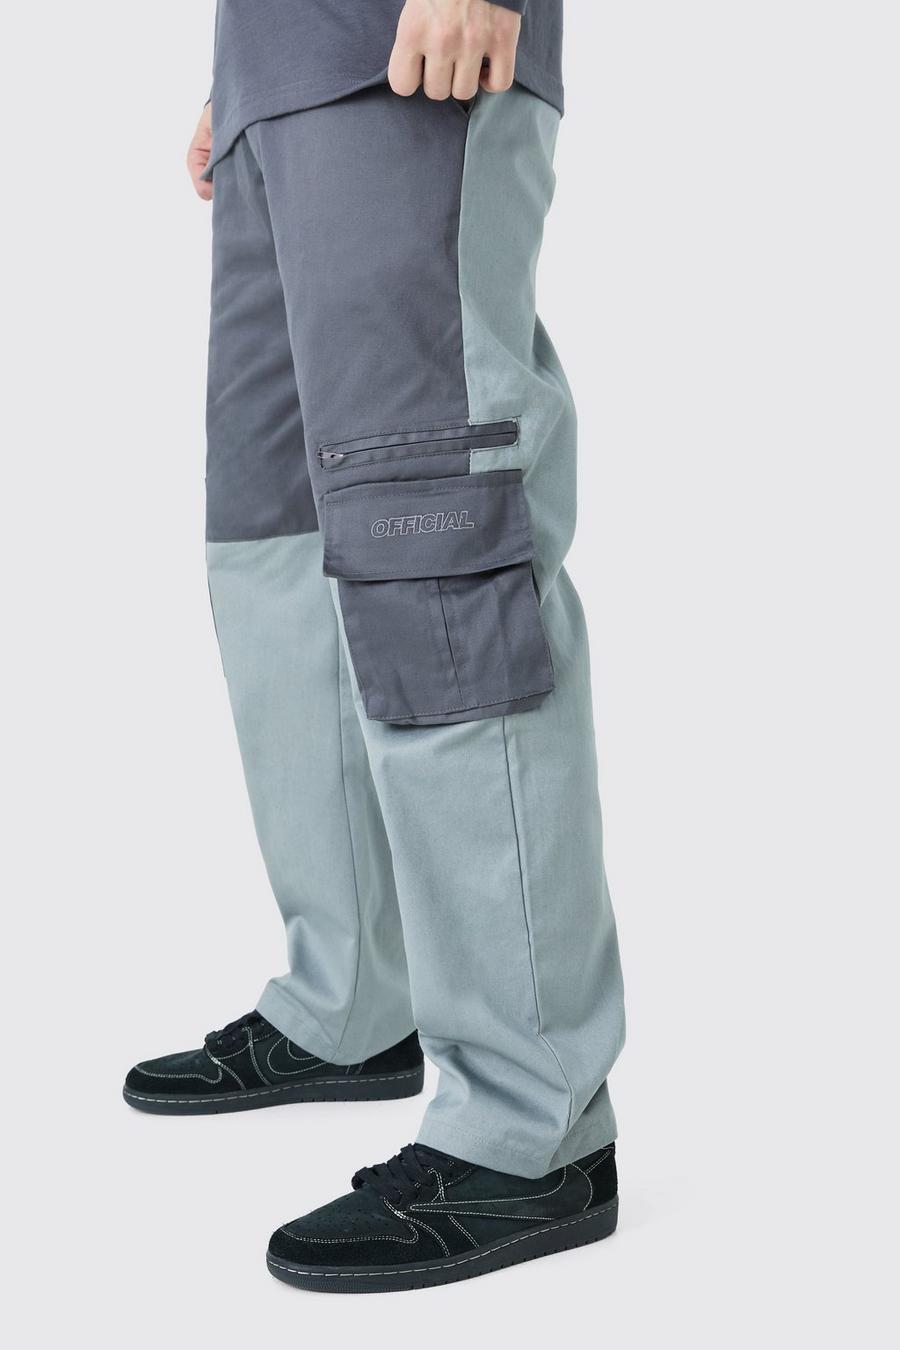 Charcoal gris Tall Relaxed Fit Colour Block Official Branded Cargo Trouser